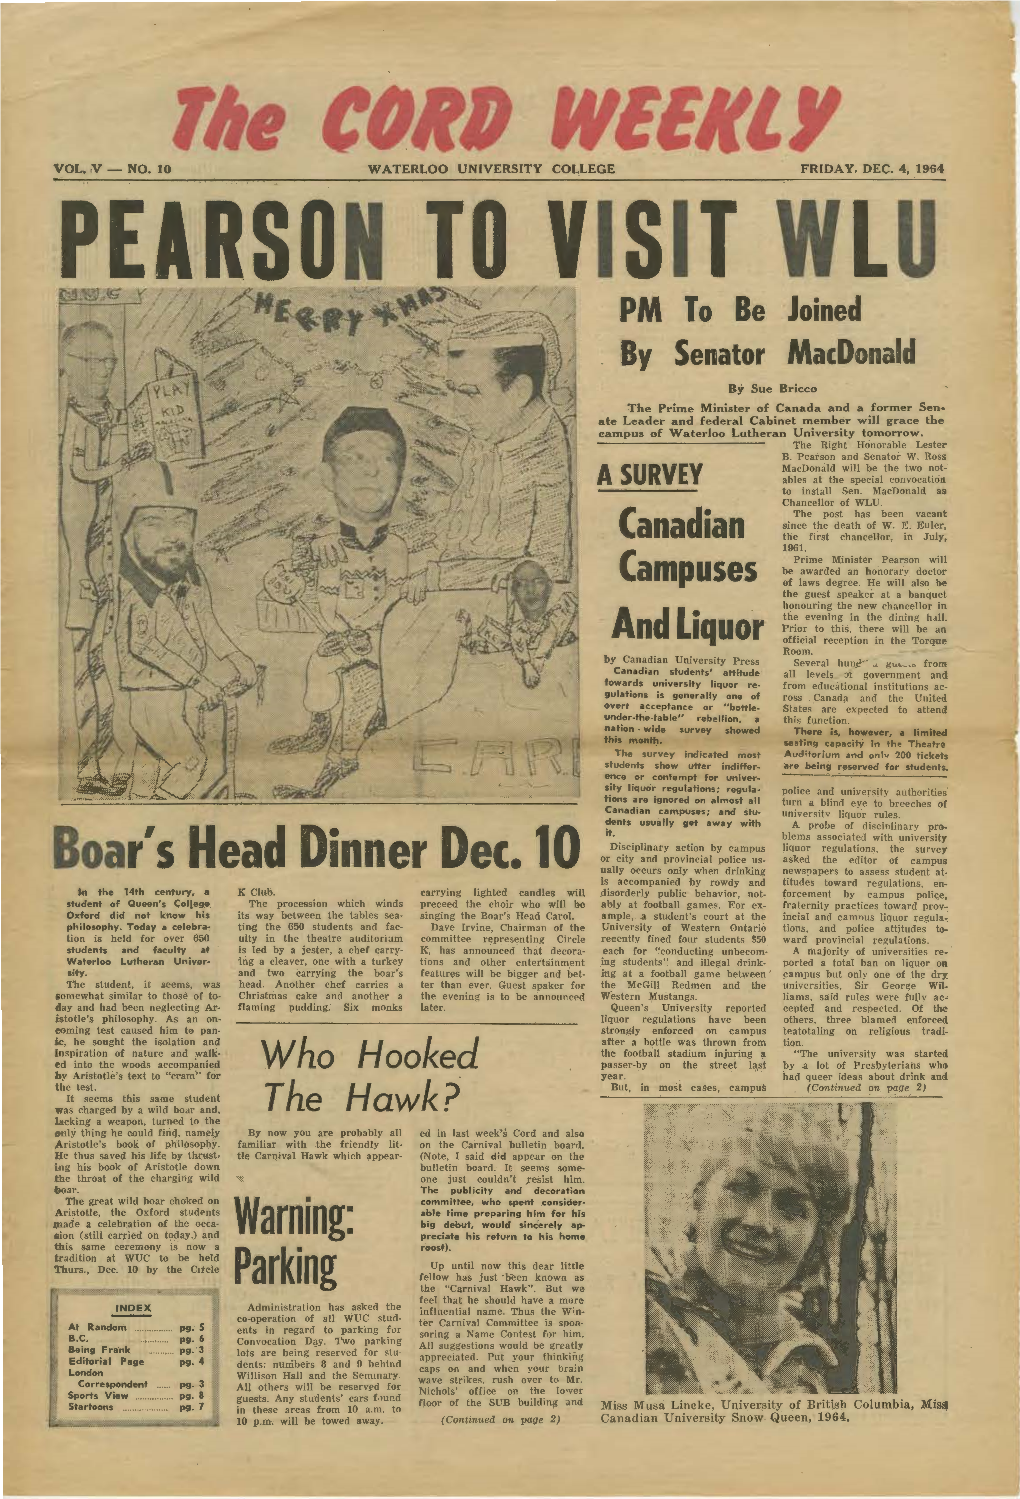 The Cord Weekly (December 4, 1964)